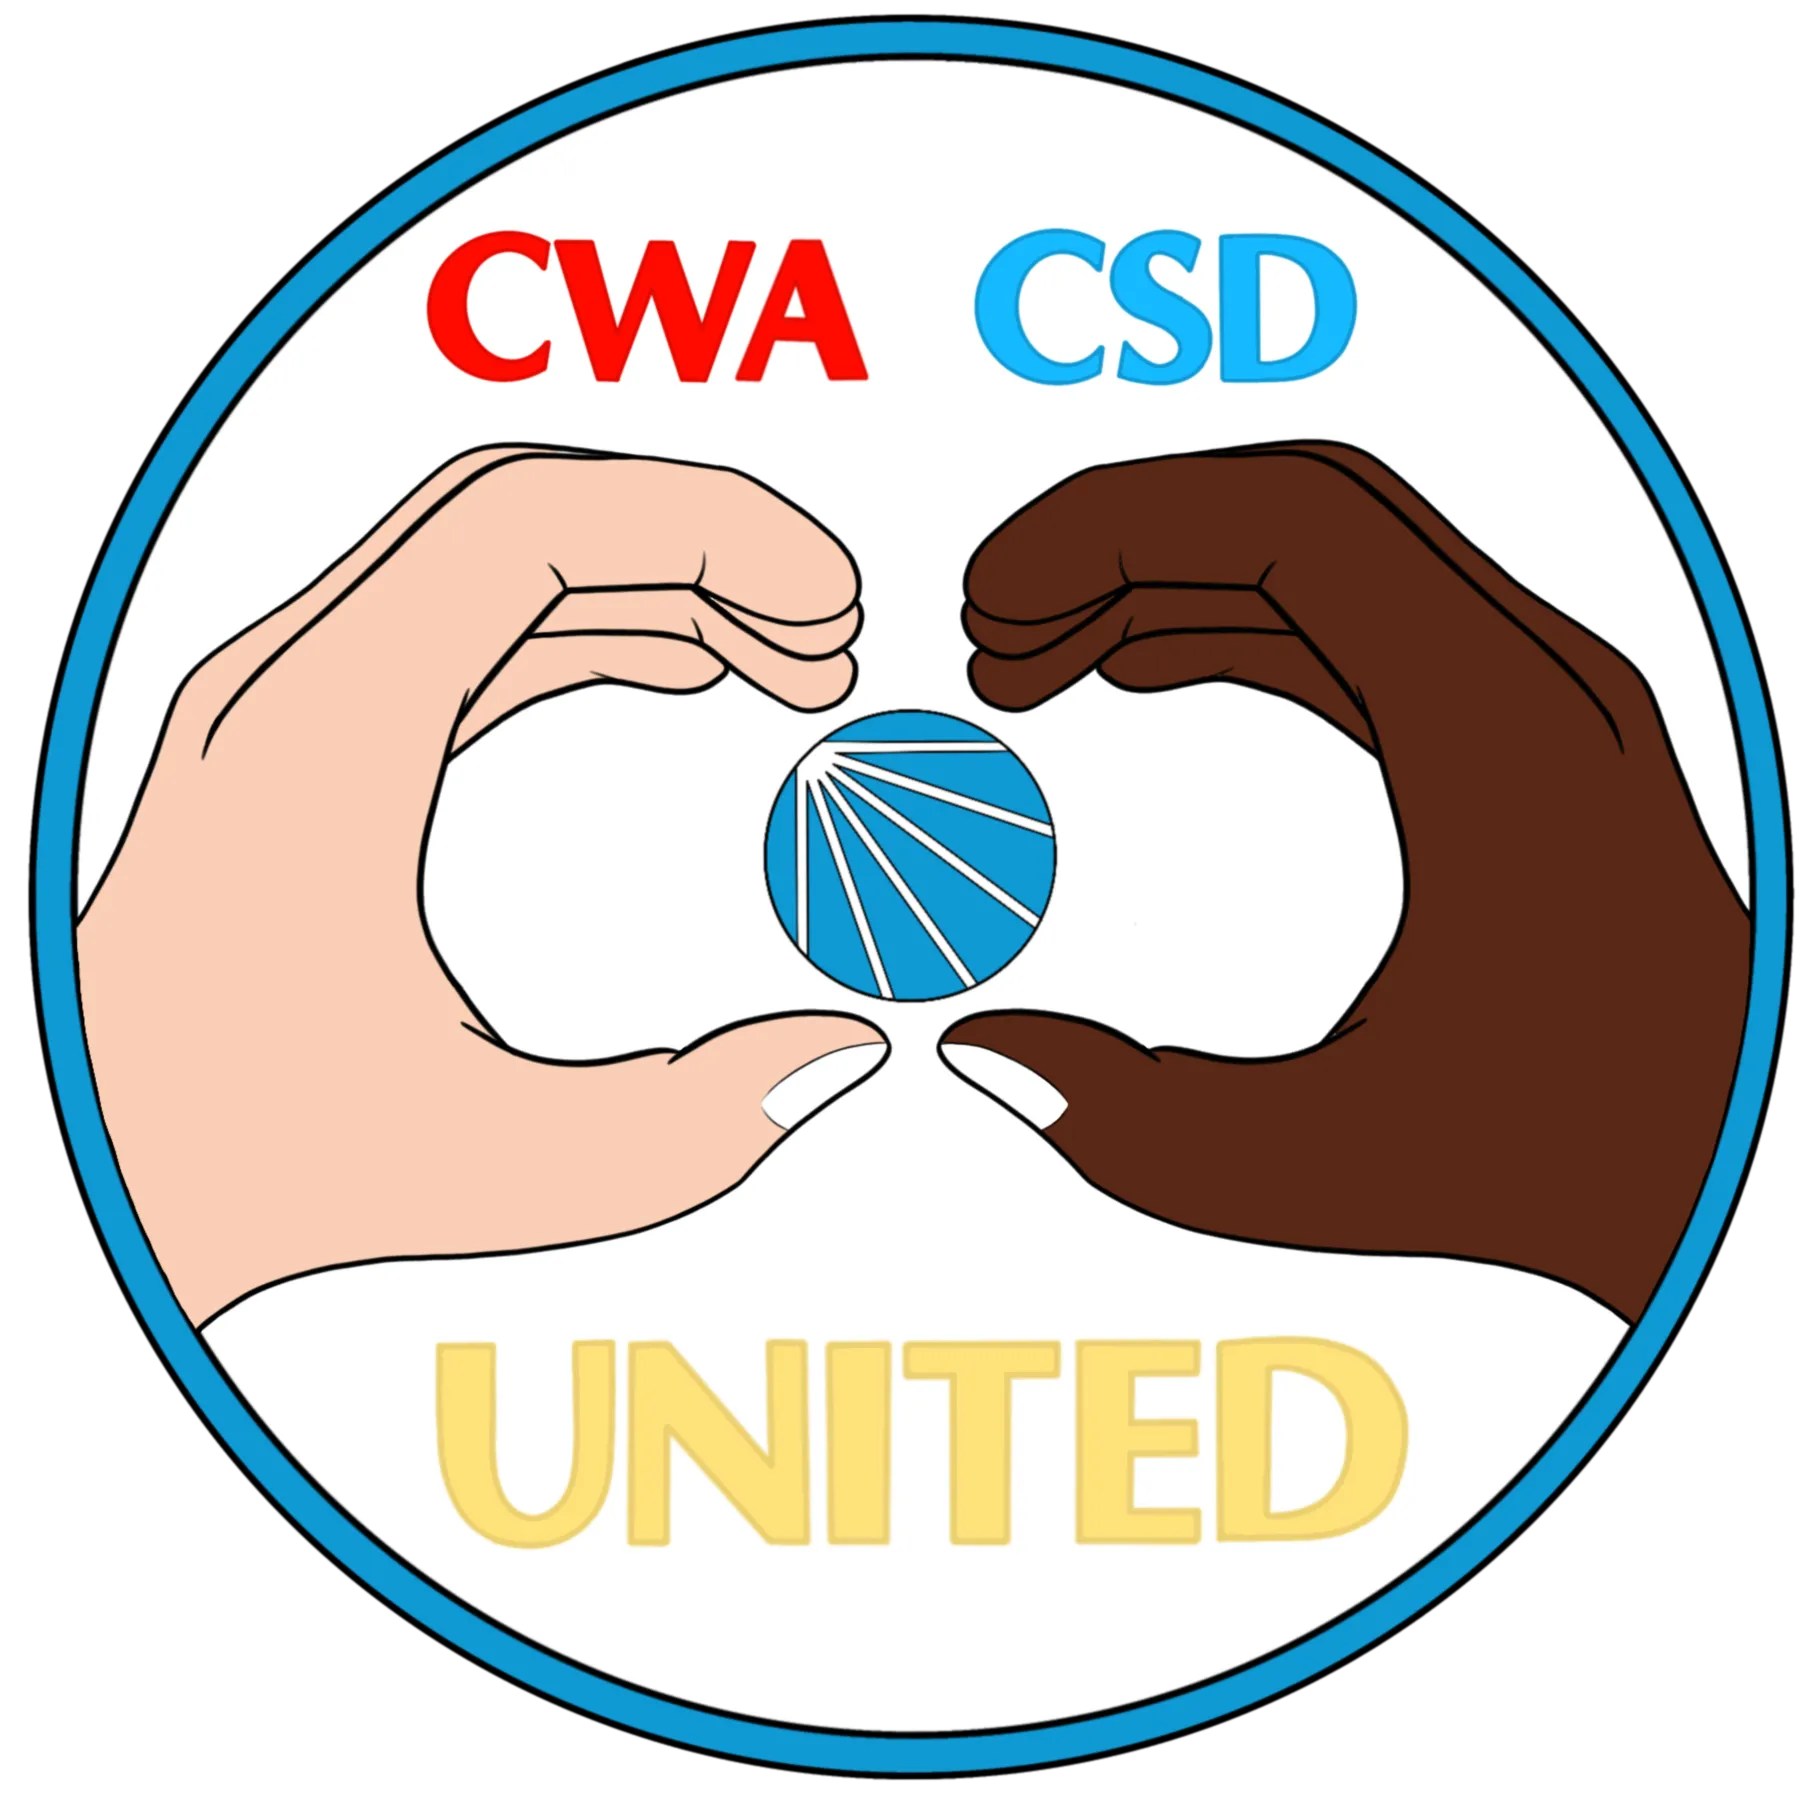 The CWA-CSD Workers United logo. Shows two hands, one African American and one white, signing the American Sign Language word for "communication".